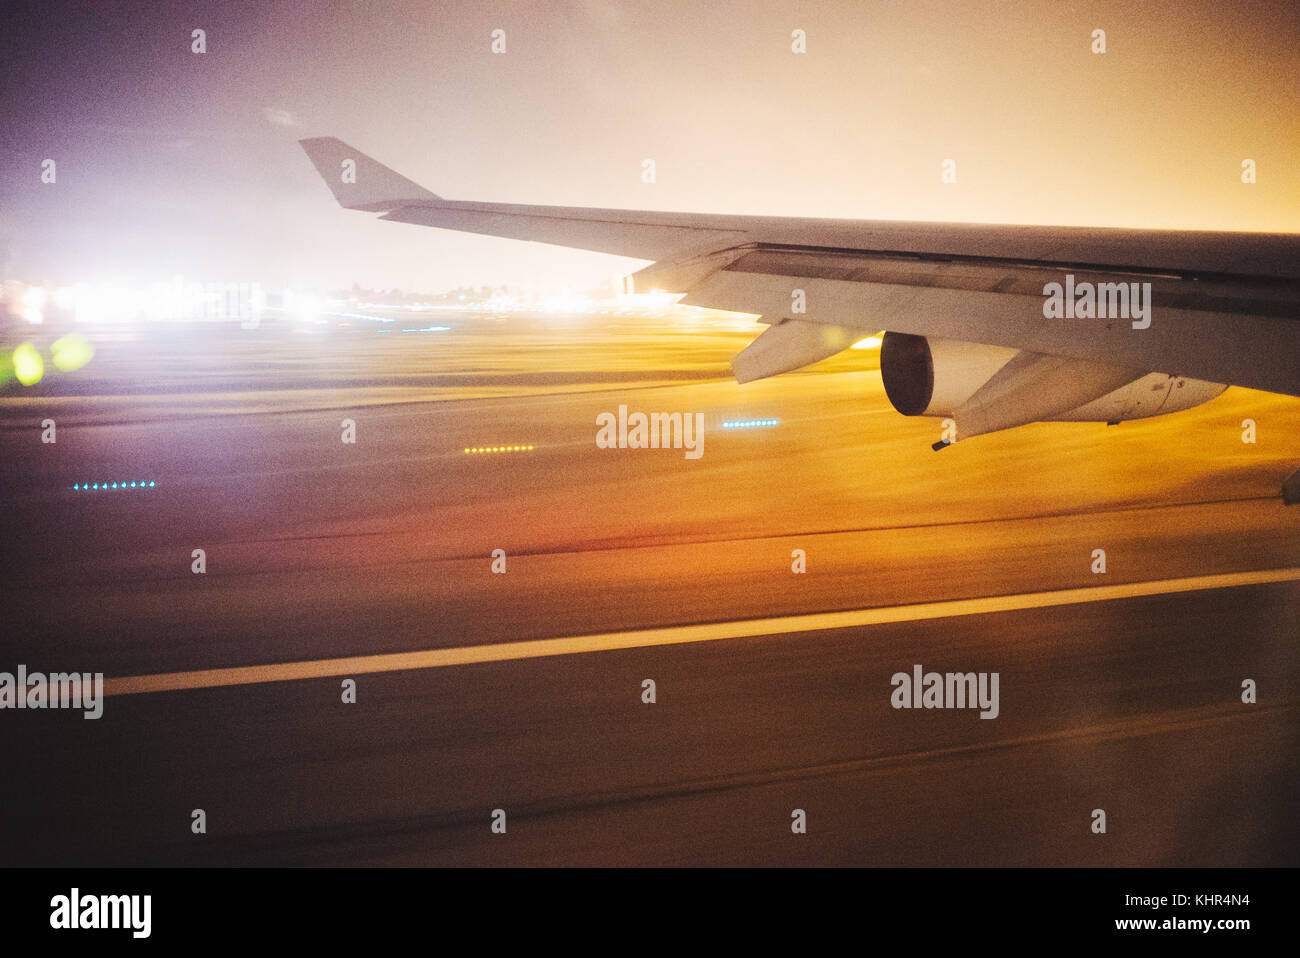 The window view from an Airbus A340-300 of Air France, departing Bogota El Dorado international airport at night Stock Photo